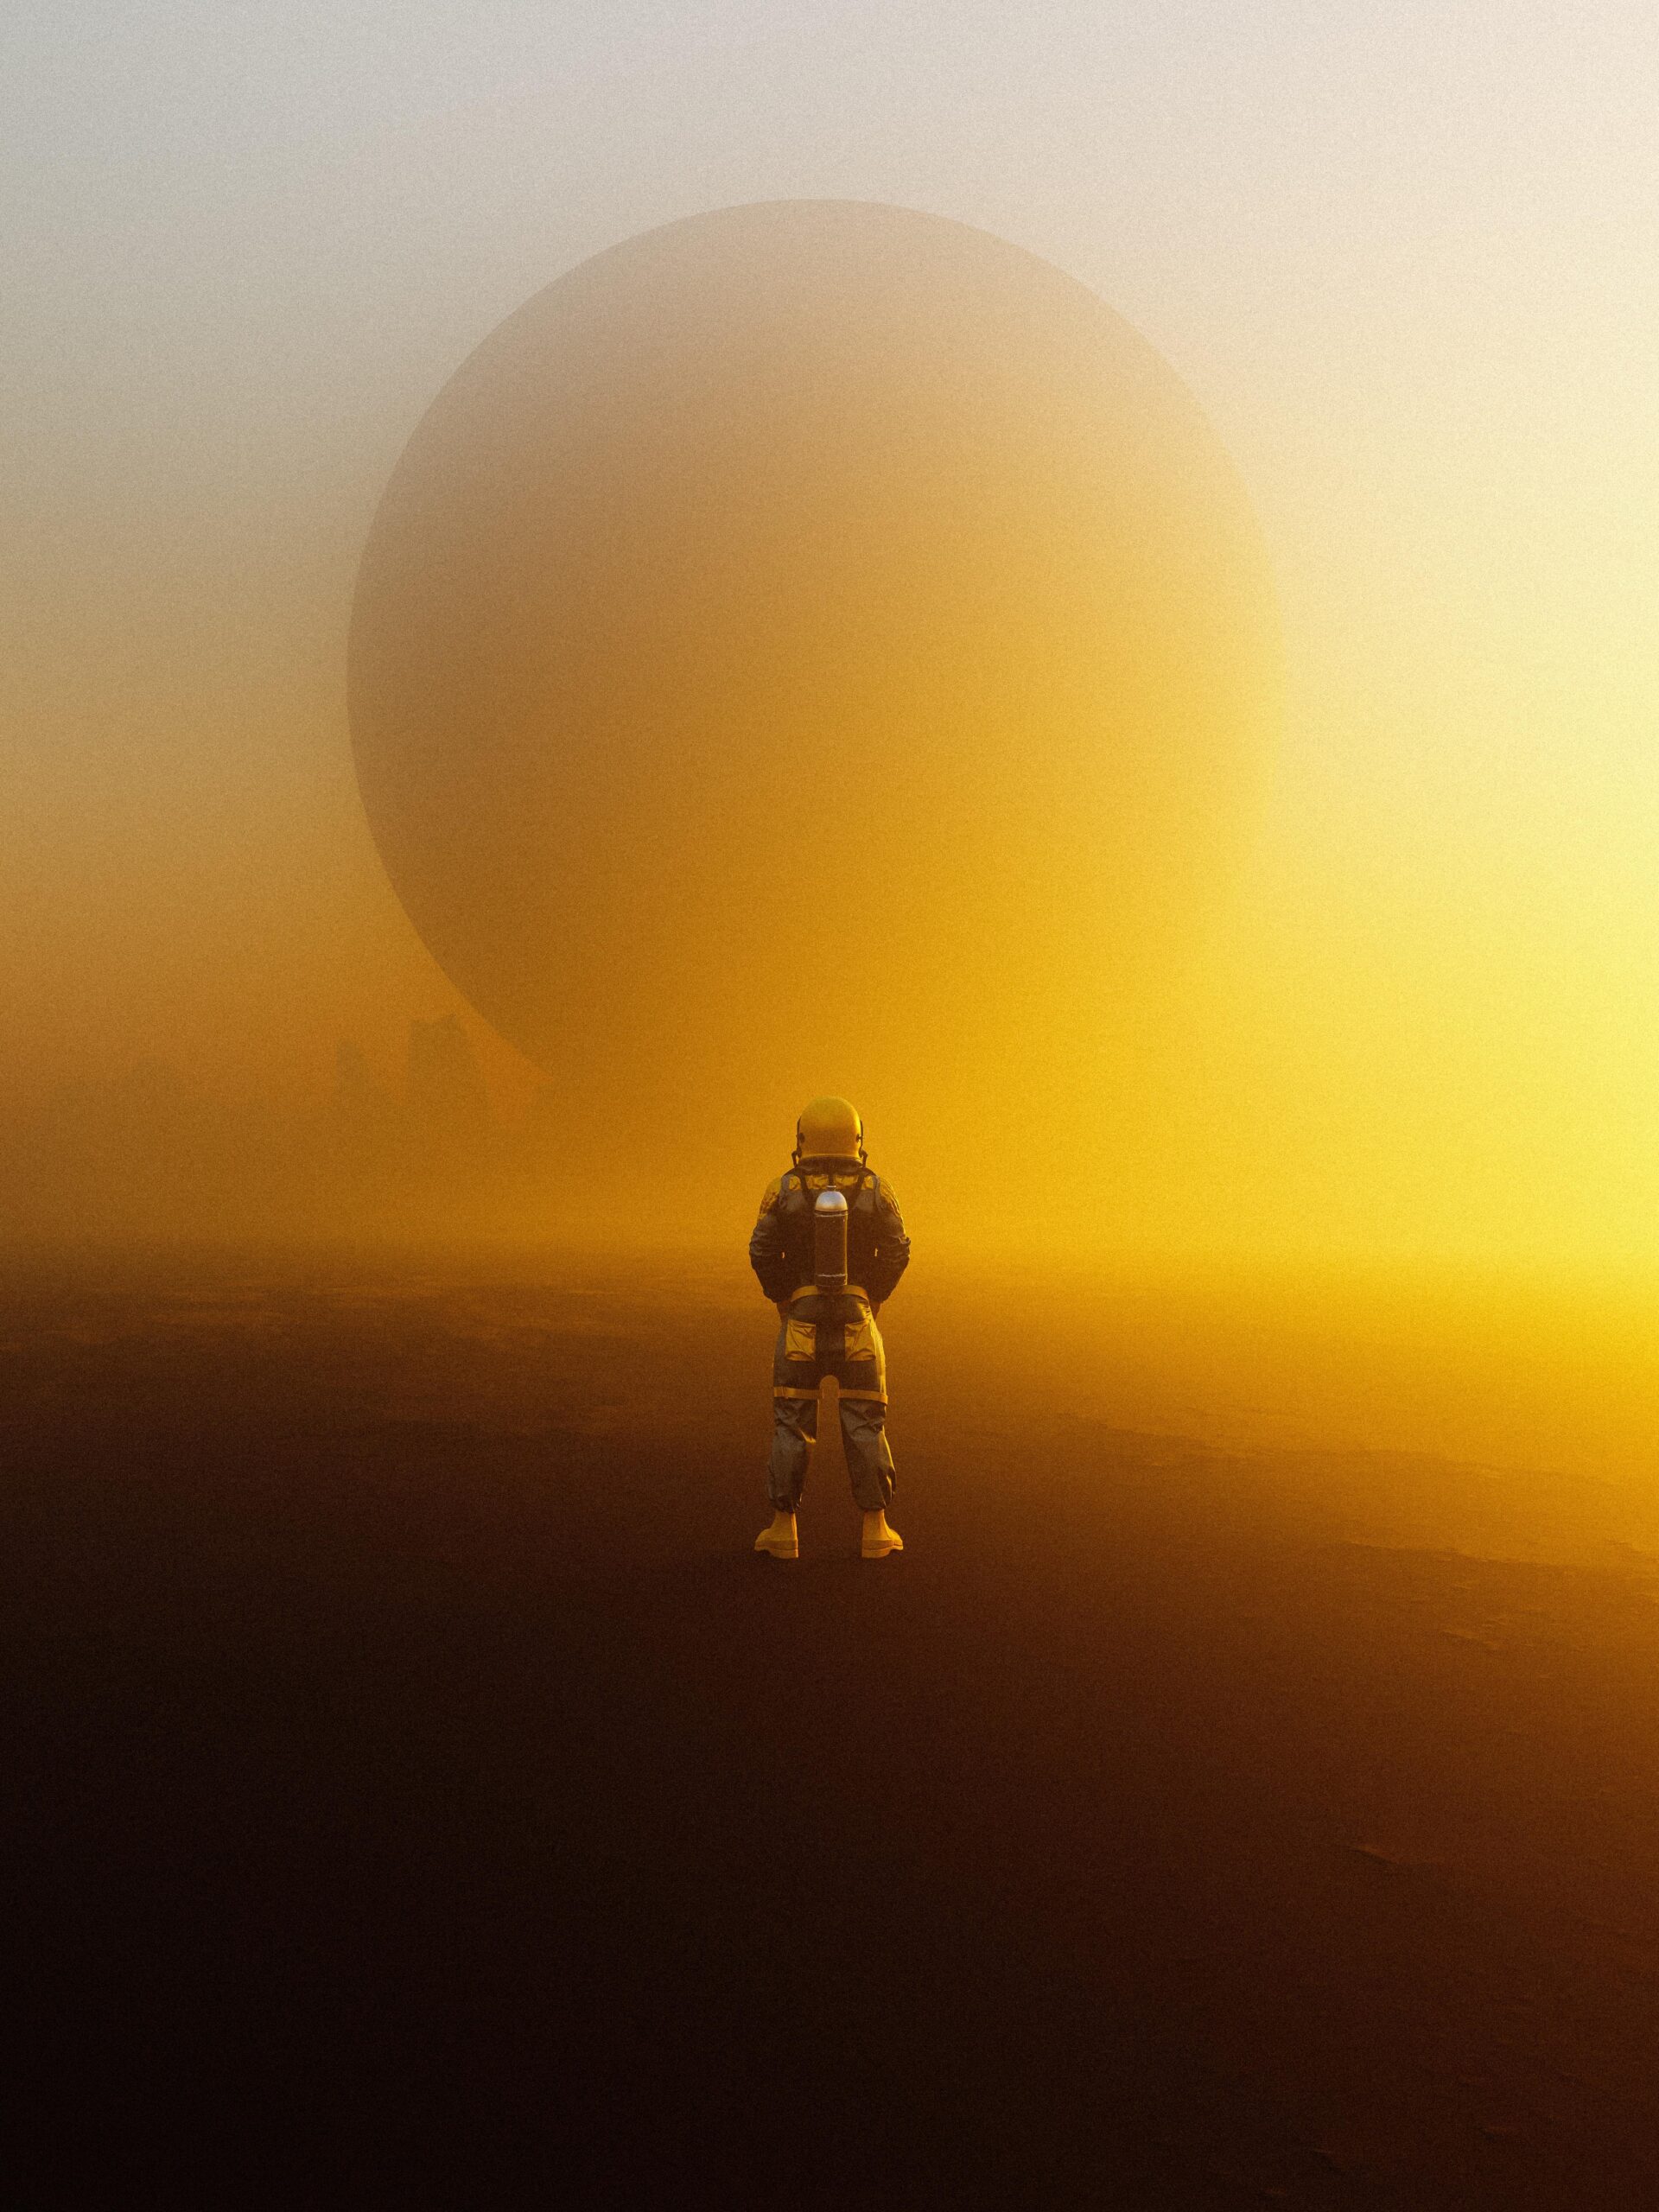 astronaut in front of the planet